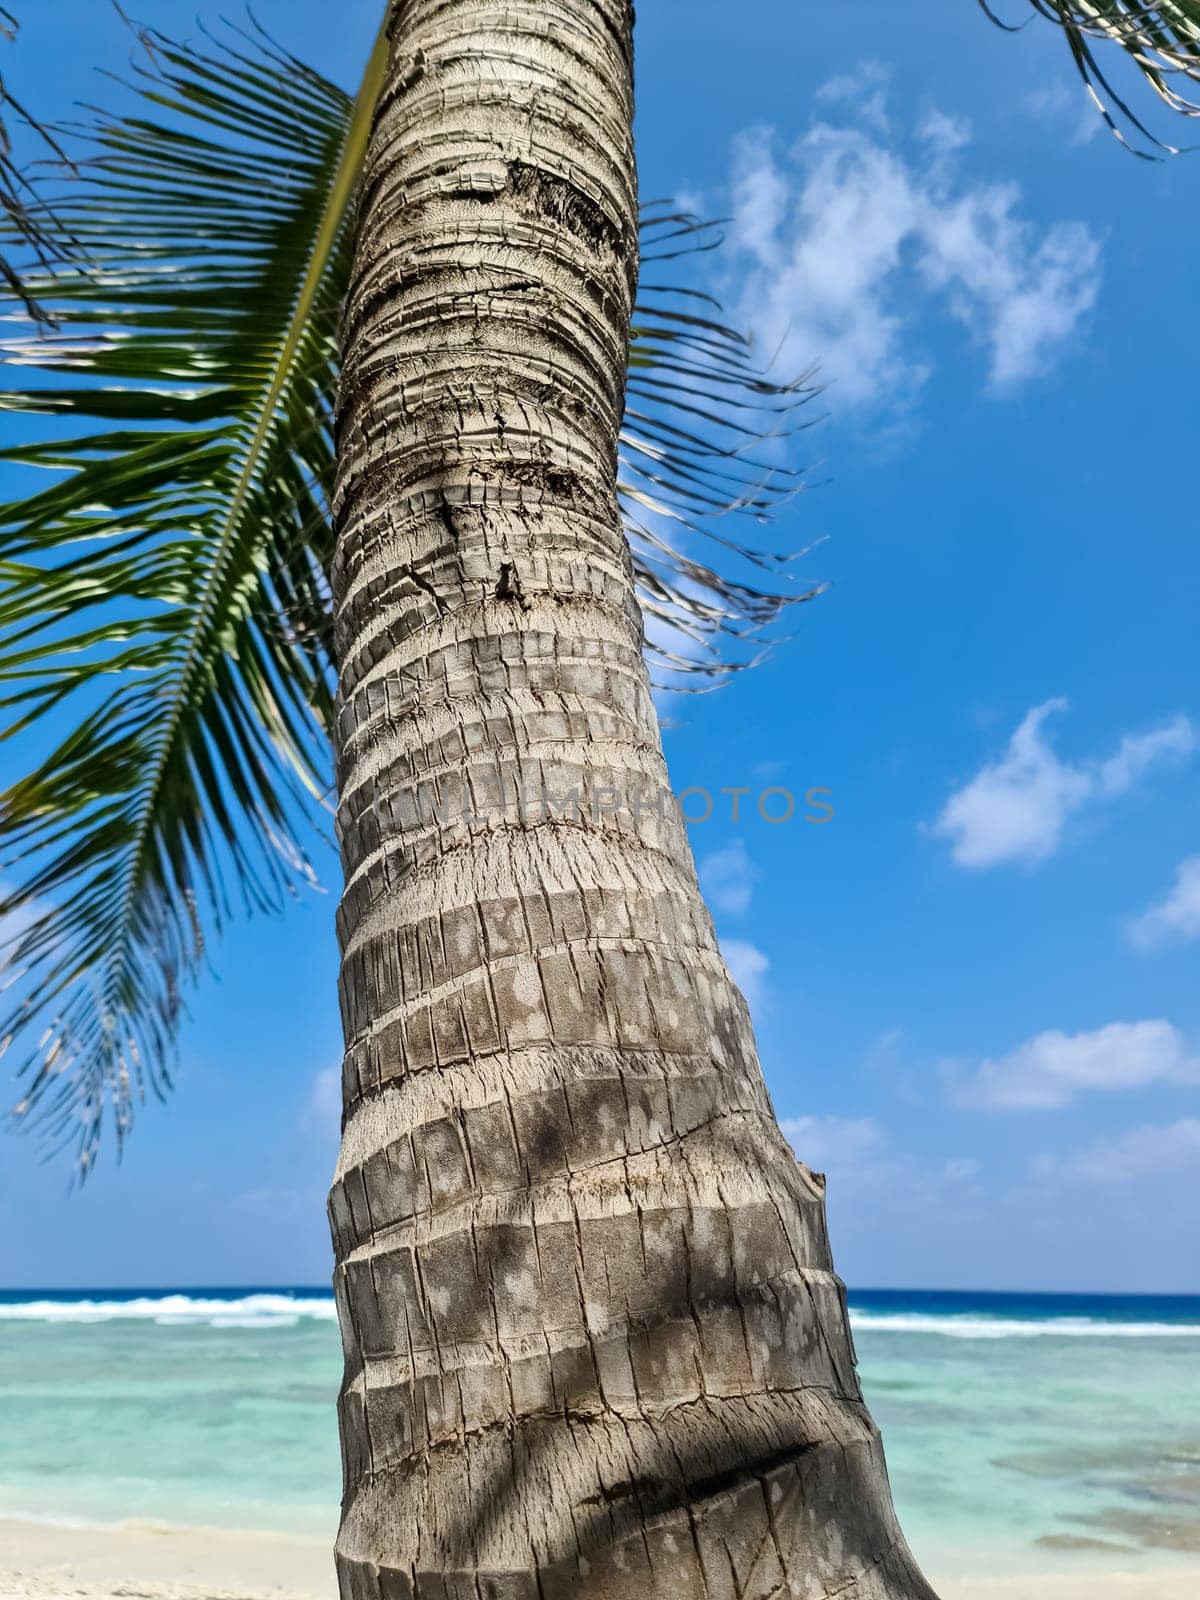 Palm trees on the beautiful beaches of the Indian Ocean in the Maldives